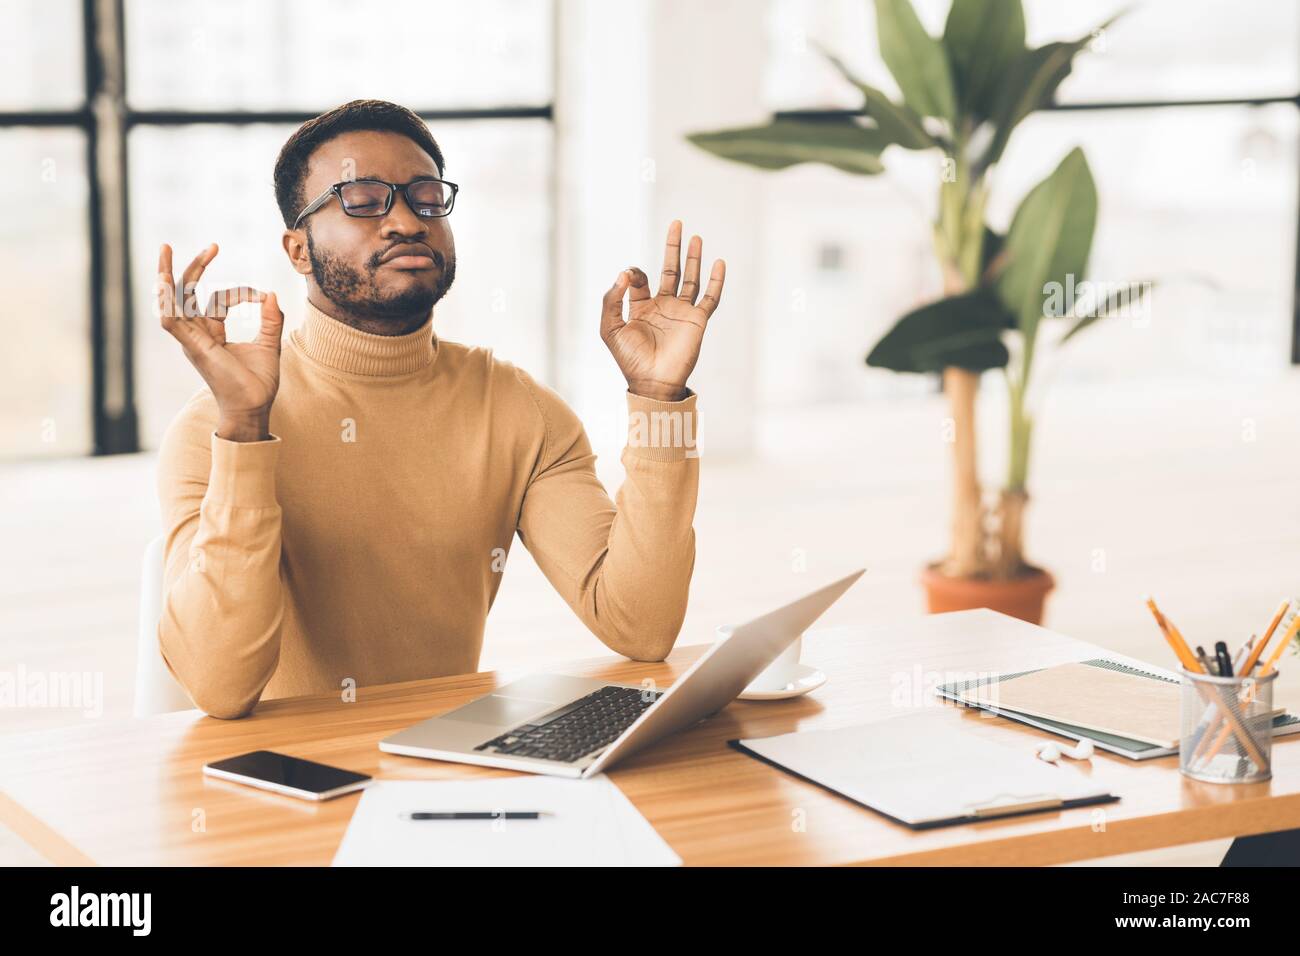 Black man meditating in office coping with stress Stock Photo